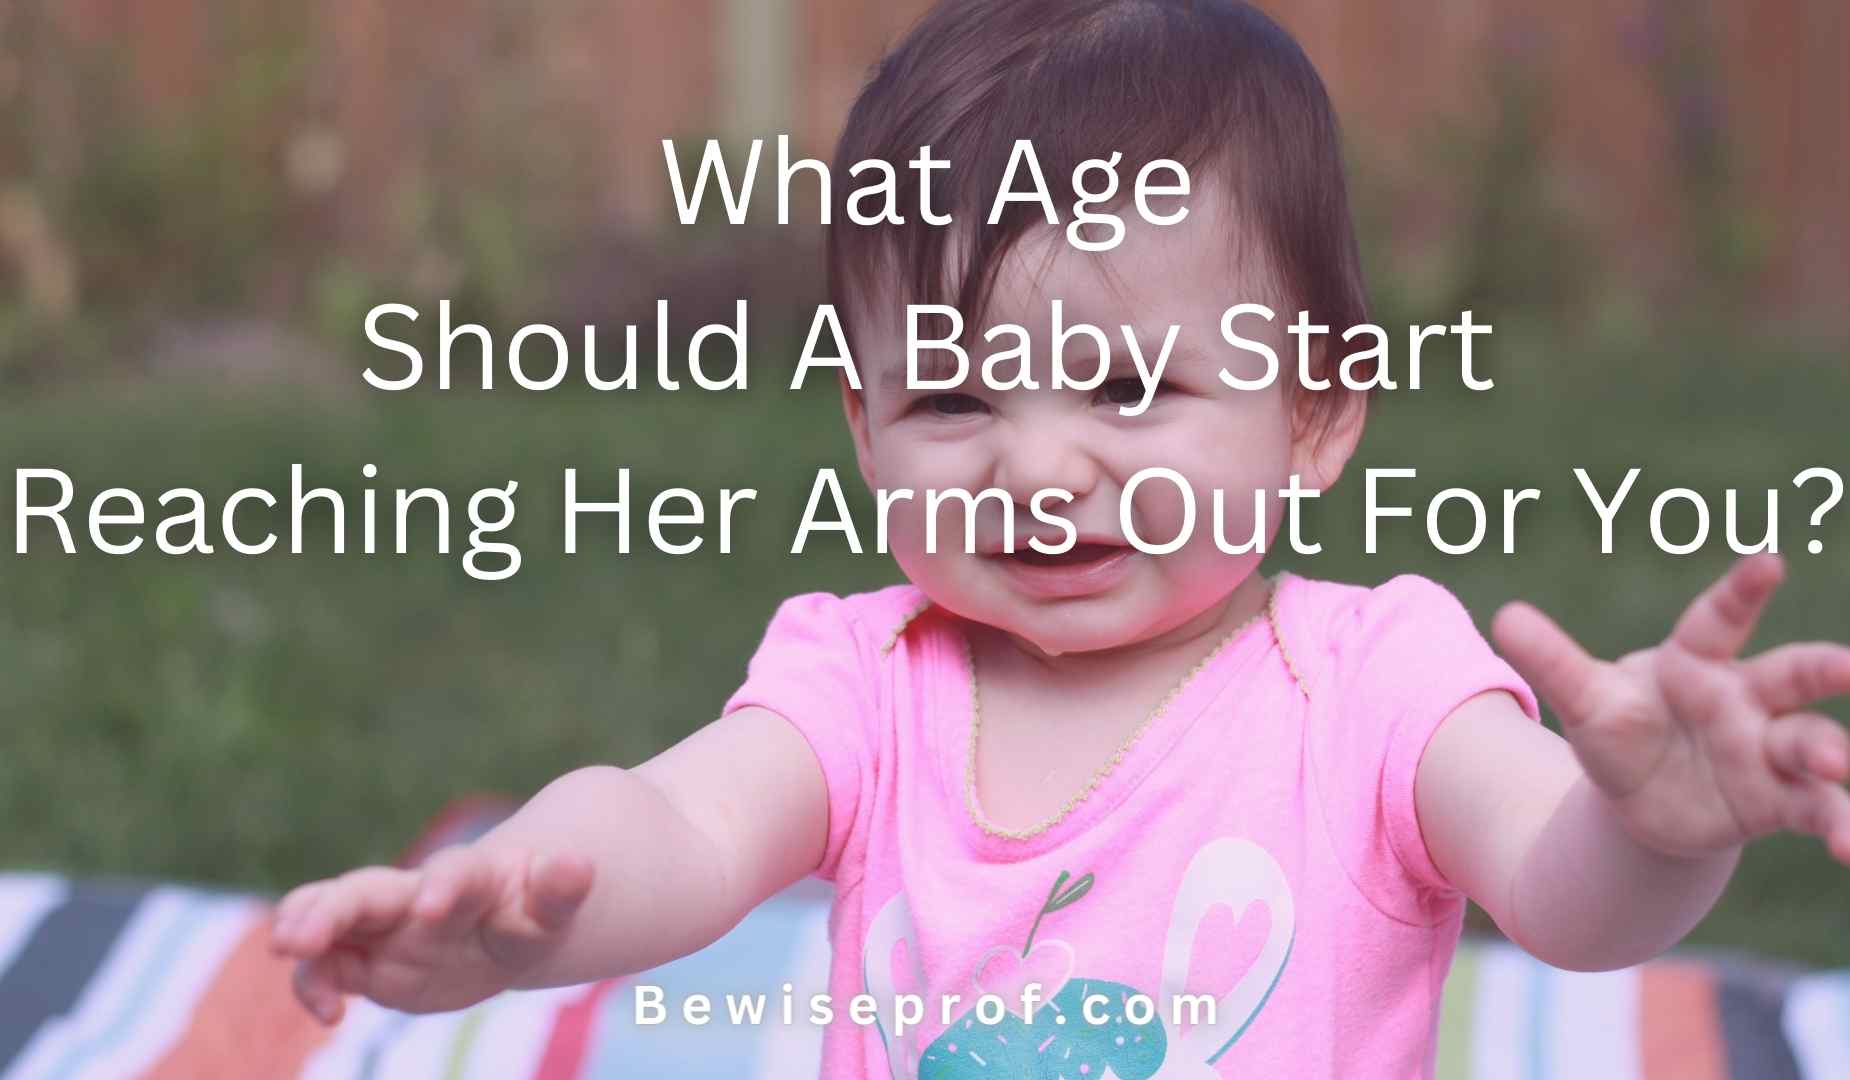 What Age Should A Baby Start Reaching Her Arms Out For You?